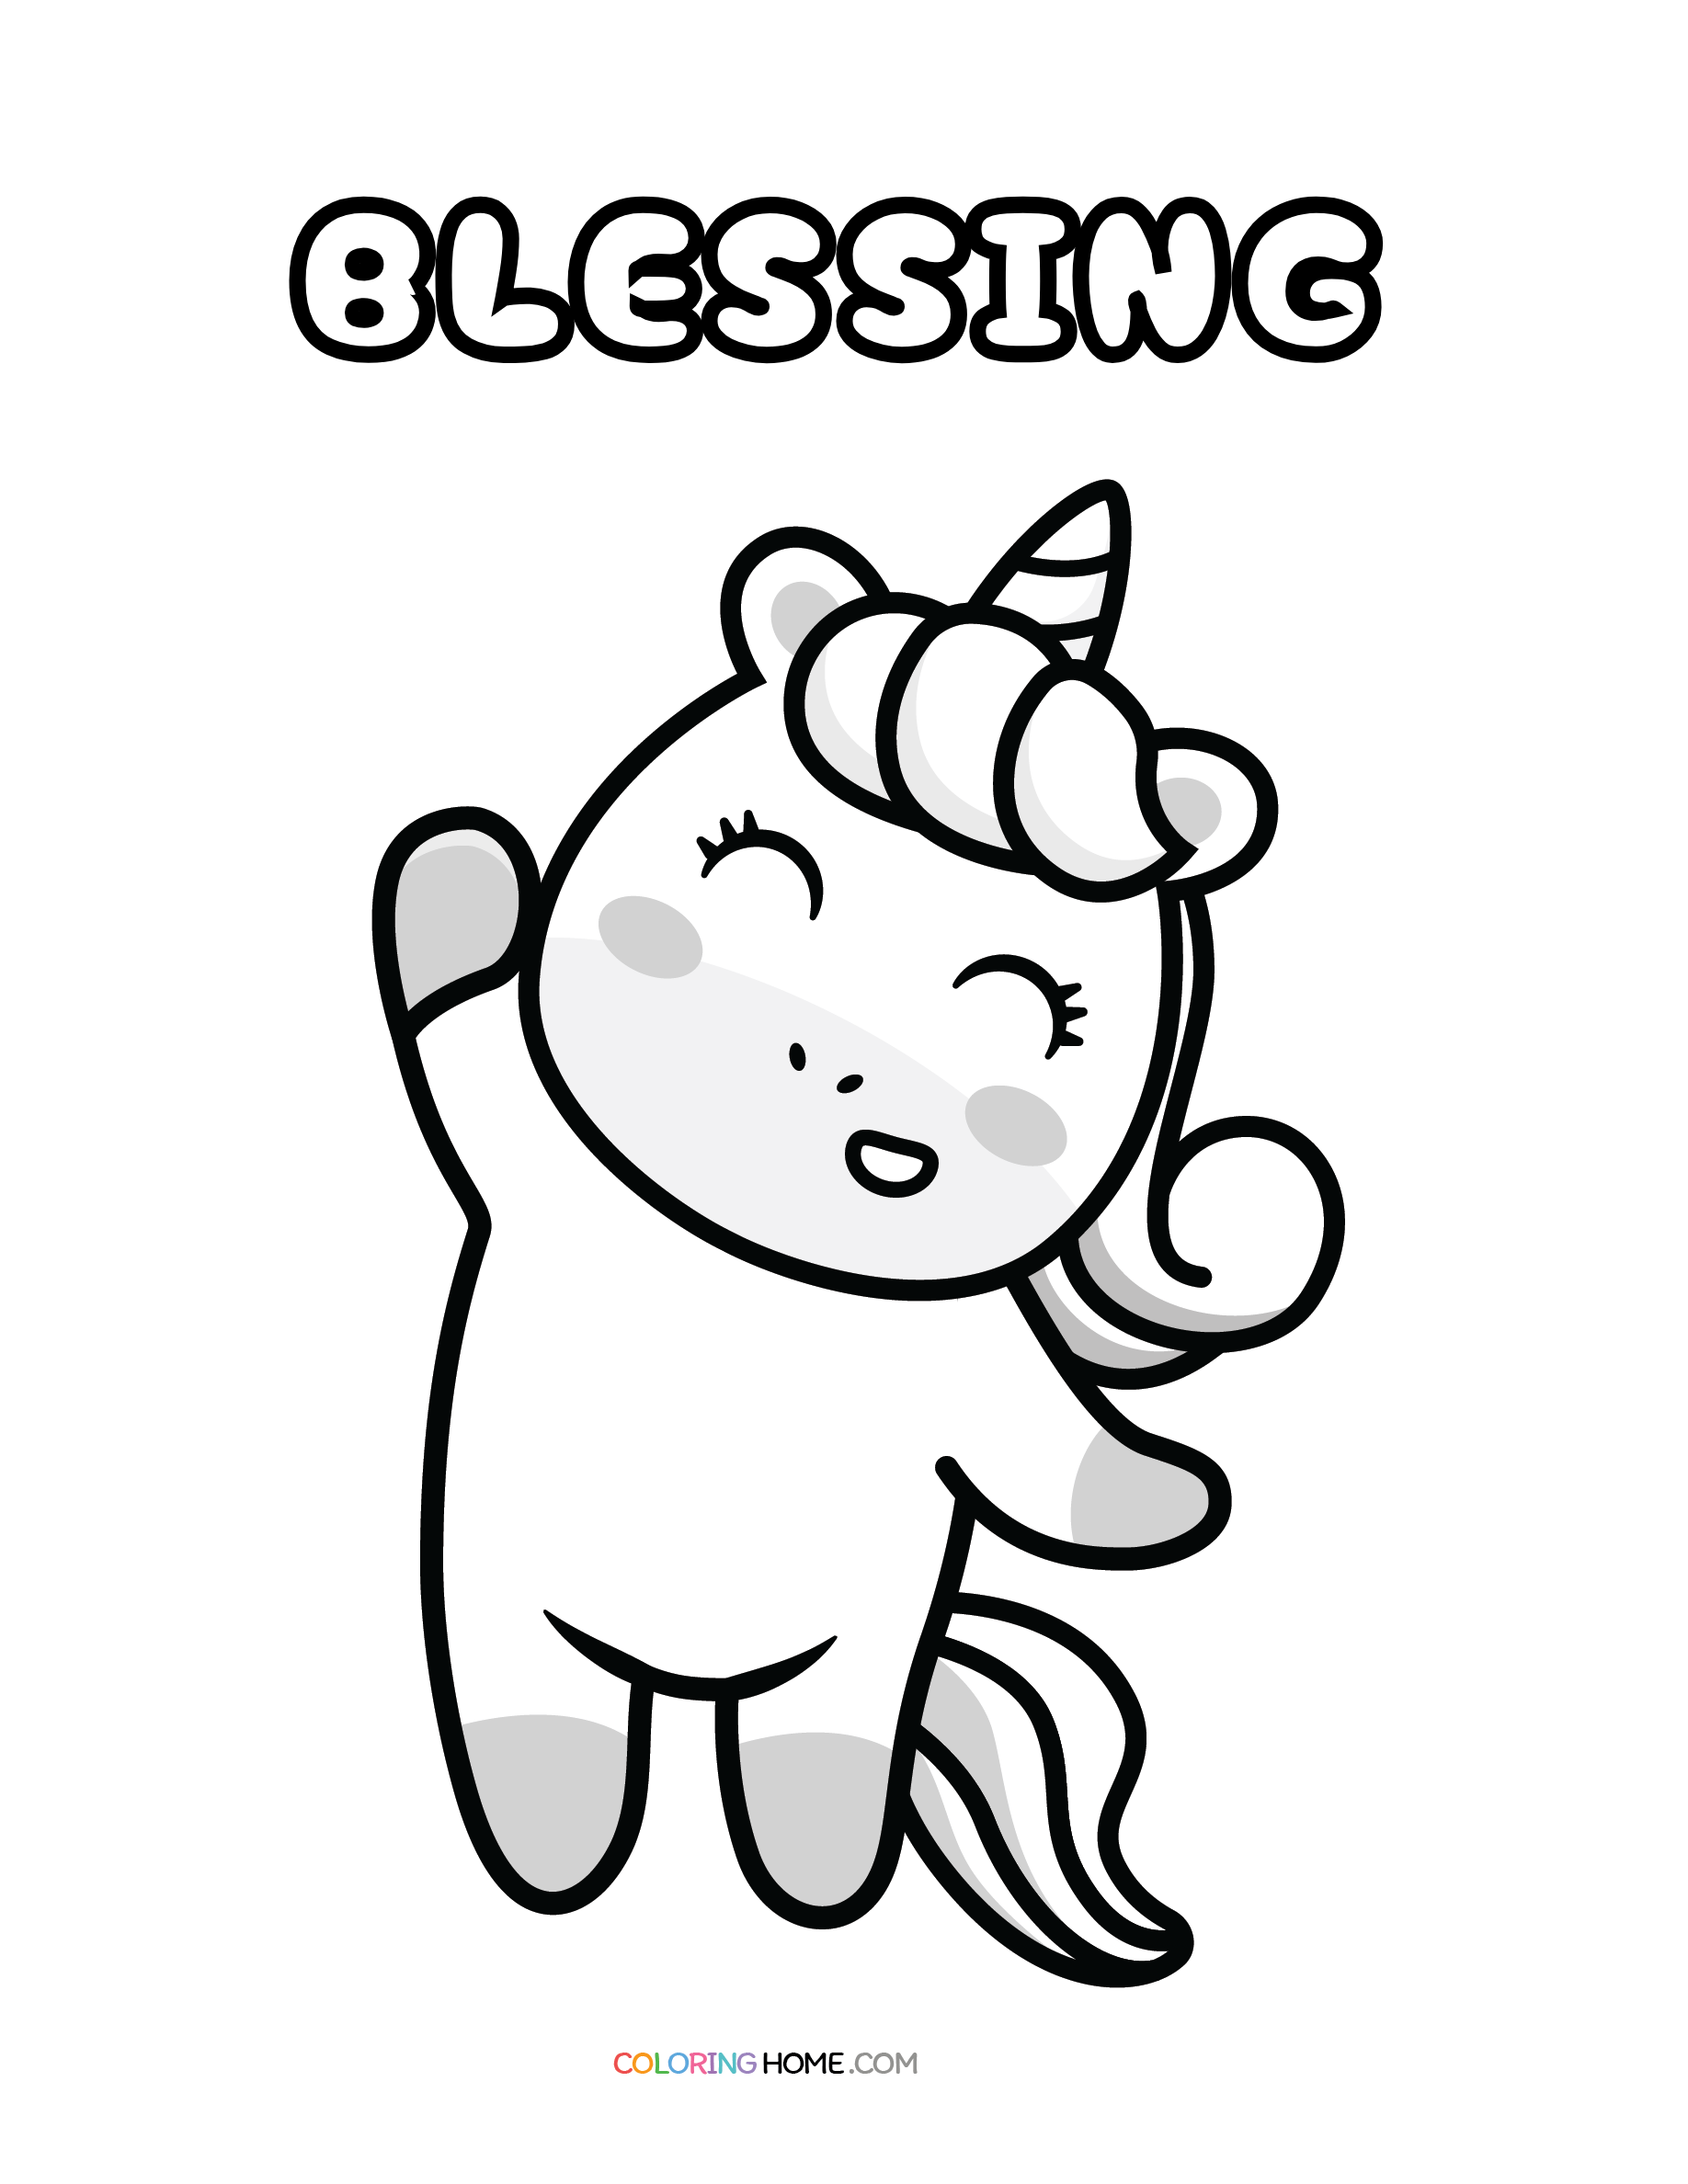 Blessing unicorn coloring page